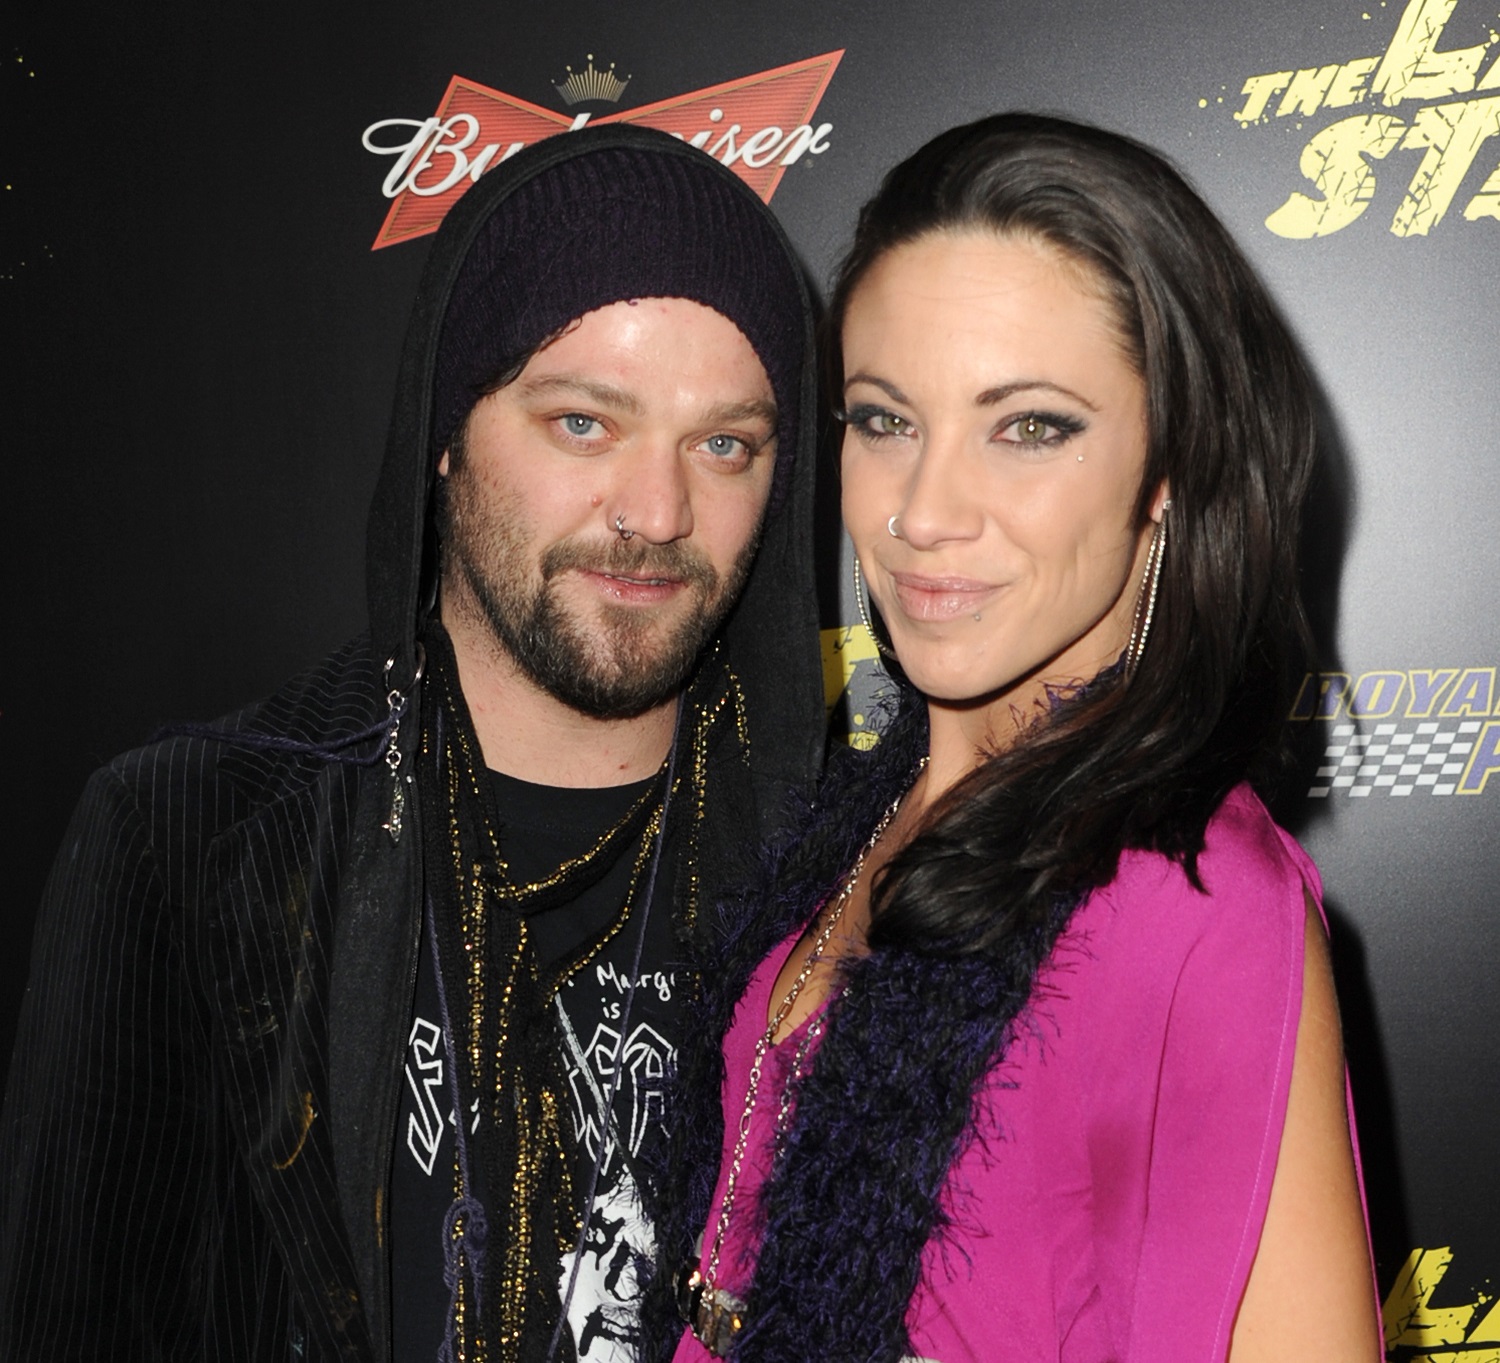 Bam Margera and wife Nicole Boyd